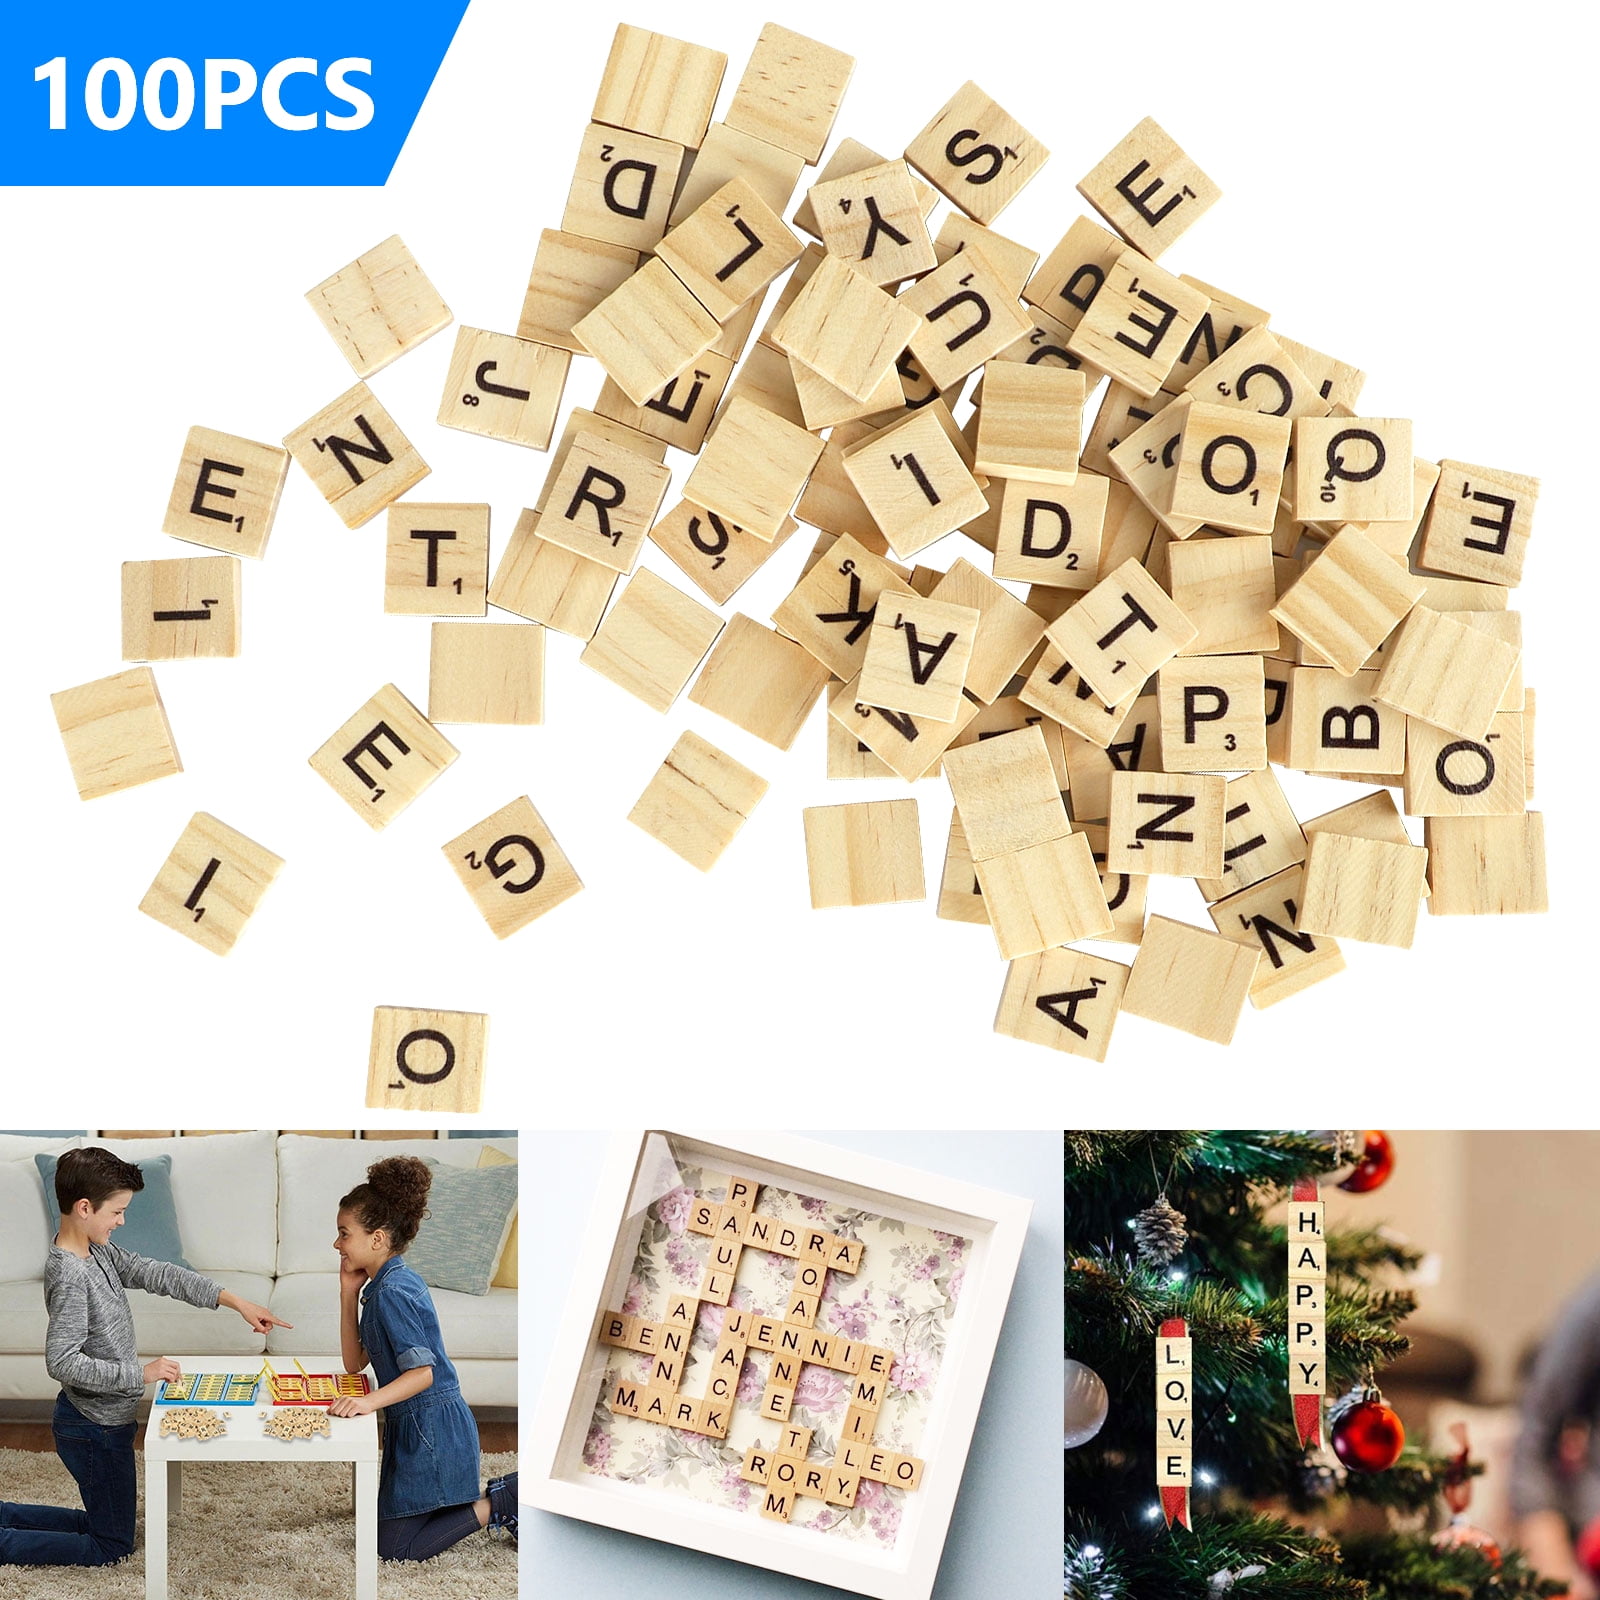 Scrabble Game Wood Letter Holders Racks Trays Stands Crafts As Many As You Want 